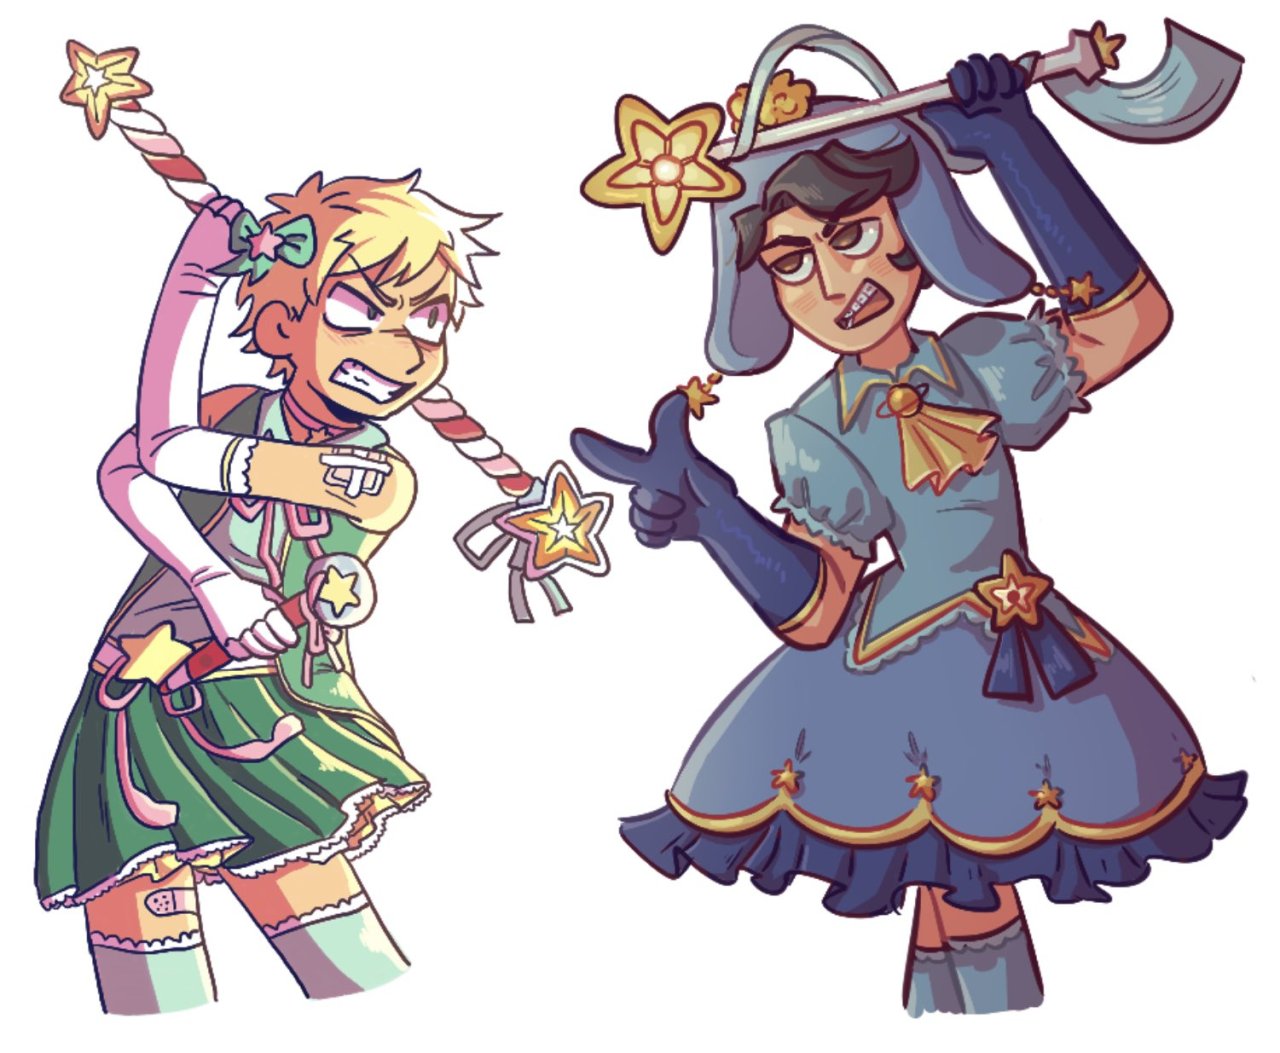 look at this awesome slaying magic girl au collab I did with @ AlsoAnoAnt on twt, we sketched/outlined one character and colored/shaded the other!! if you have a twitter and aren’t following her do it now! Look at how much we slayed!!  #art collab#south park#Tweek Tweak#sp tweek#Craig Tucker#sp craig#creek#sp creek#aggie art#metukikart